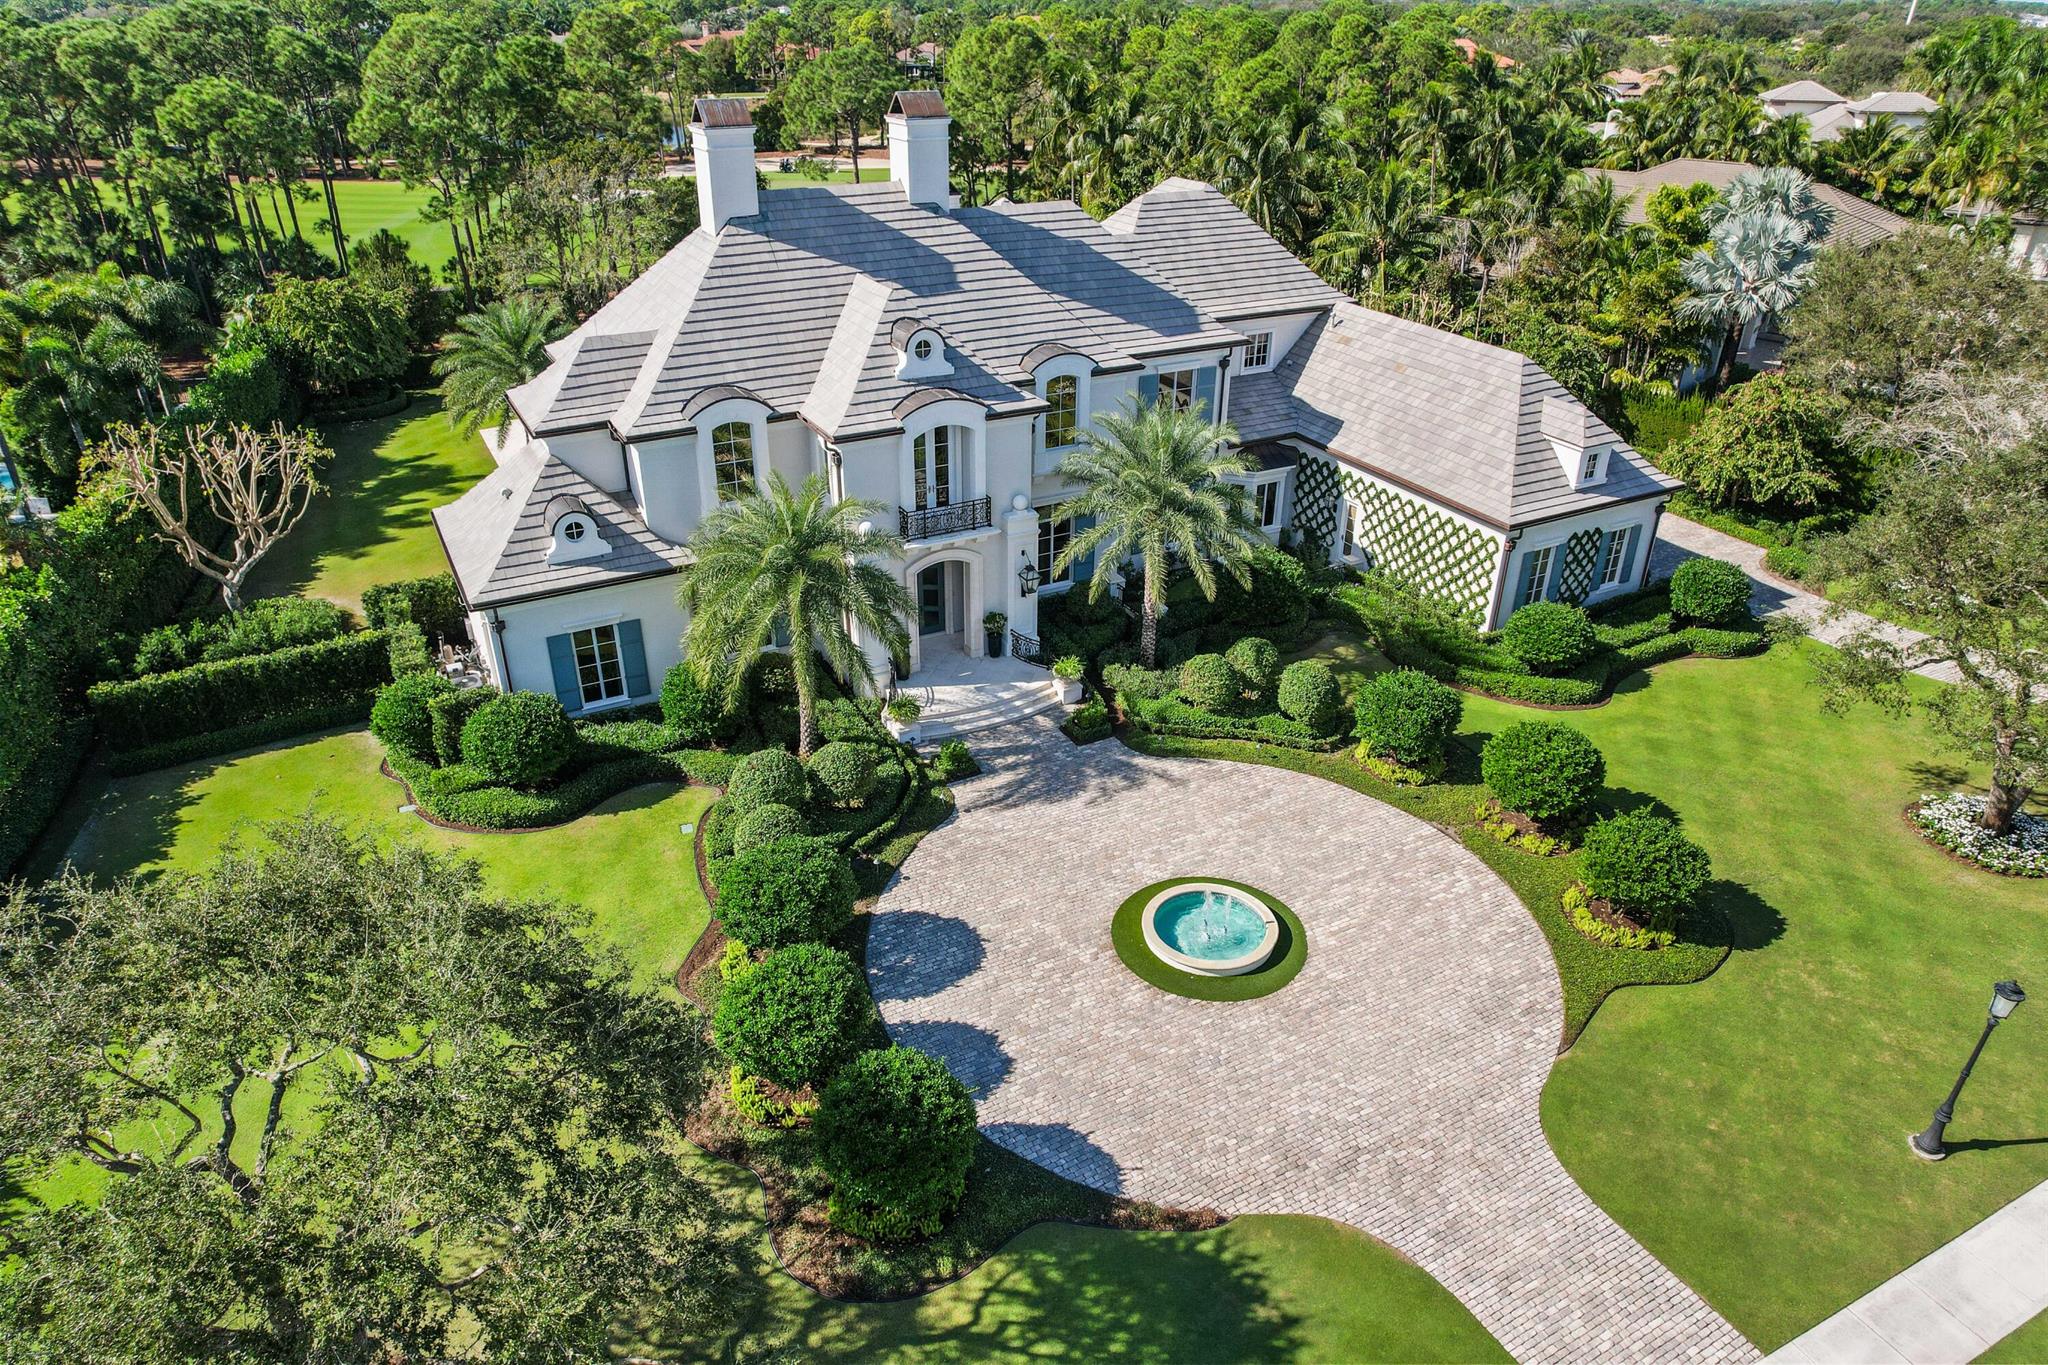 This stunning home, nestled on a 1-acre plot within the prestigious Old Palm Golf Club, emanates European elegance. Encompassing over 8000 sf, it features five bedrooms, including a spacious second floor primary suite with separate bath and dressing rooms, two offices, a temperature controlled wine room, elevator, attached guest house and a four-car garage. Meticulously detailed, the residence caters to the most discerning buyers who appreciate exquisite craftsmanship. Recent enhancements span electrical, audiovisual, and landscaping, elevating the home's allure. Beyond the confines of this luxurious abode, Old Palm Golf Club beckons with its renovated clubhouse, a new 20,000 sf. Lifestyle center, and top-notch amenities (two story fitness facility, four lane outdoor lap pool,